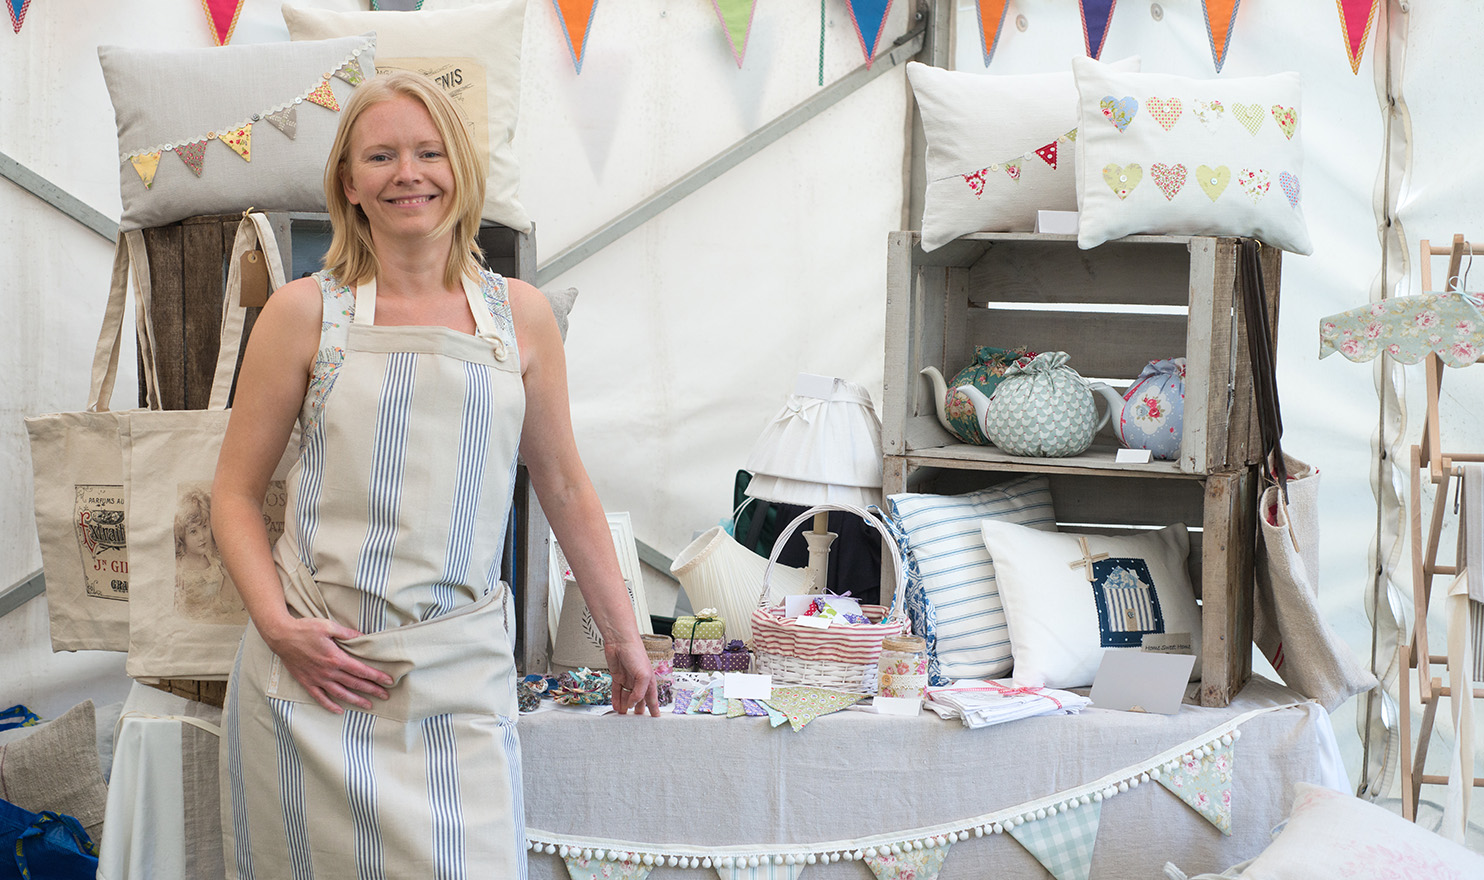 A crafter stands proudly in her vendor booth at an event. She is wearing a striped apron and is standing in front of her display table of pillows, pottery, and home decor.